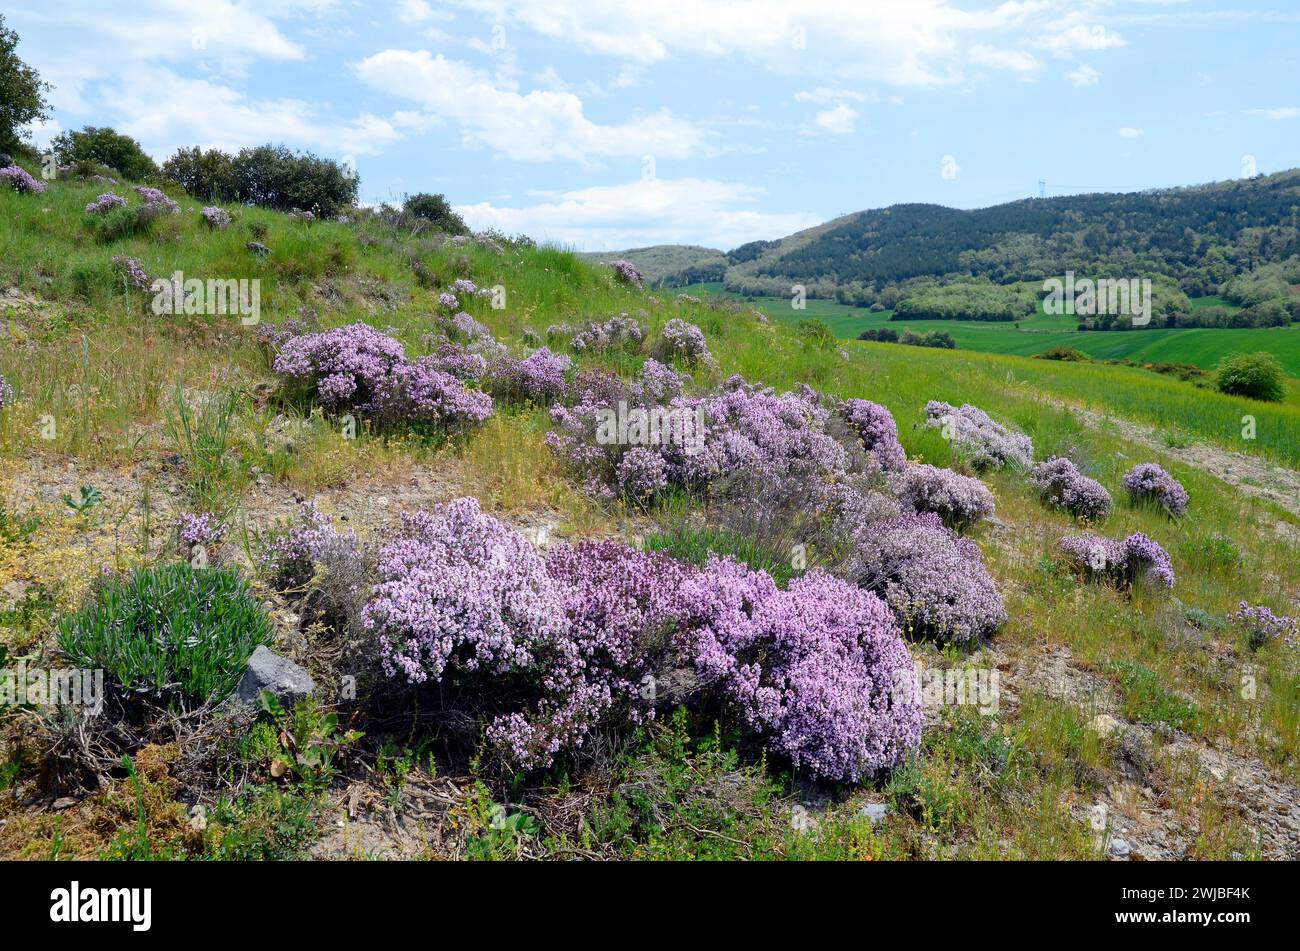 Landscape with thyme bushes (Thymus vulgaris) in flower Stock Photo